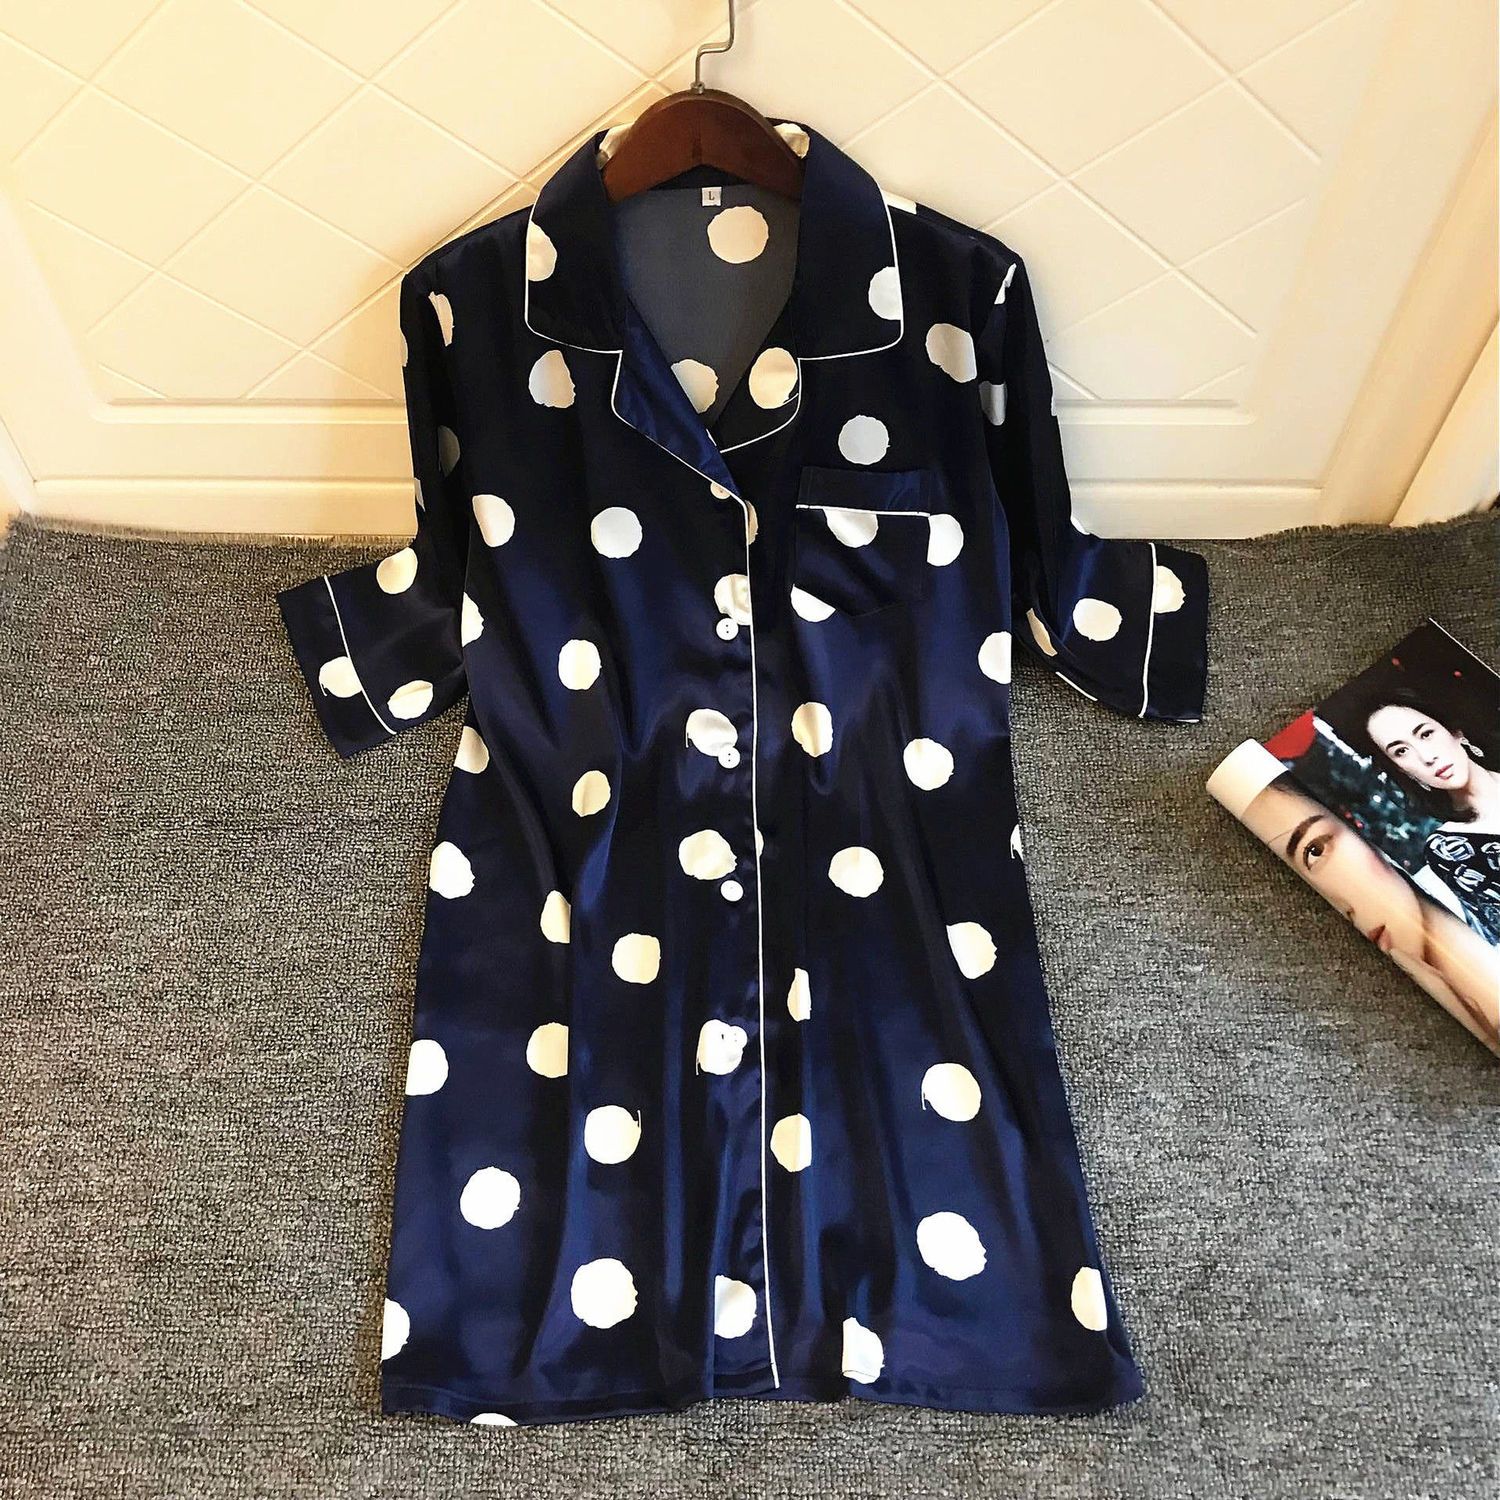 White polka dot shirt sexy pajamas female spring and autumn mid-length nightdress sweet and cute ice silk cardigan with thin sleeves